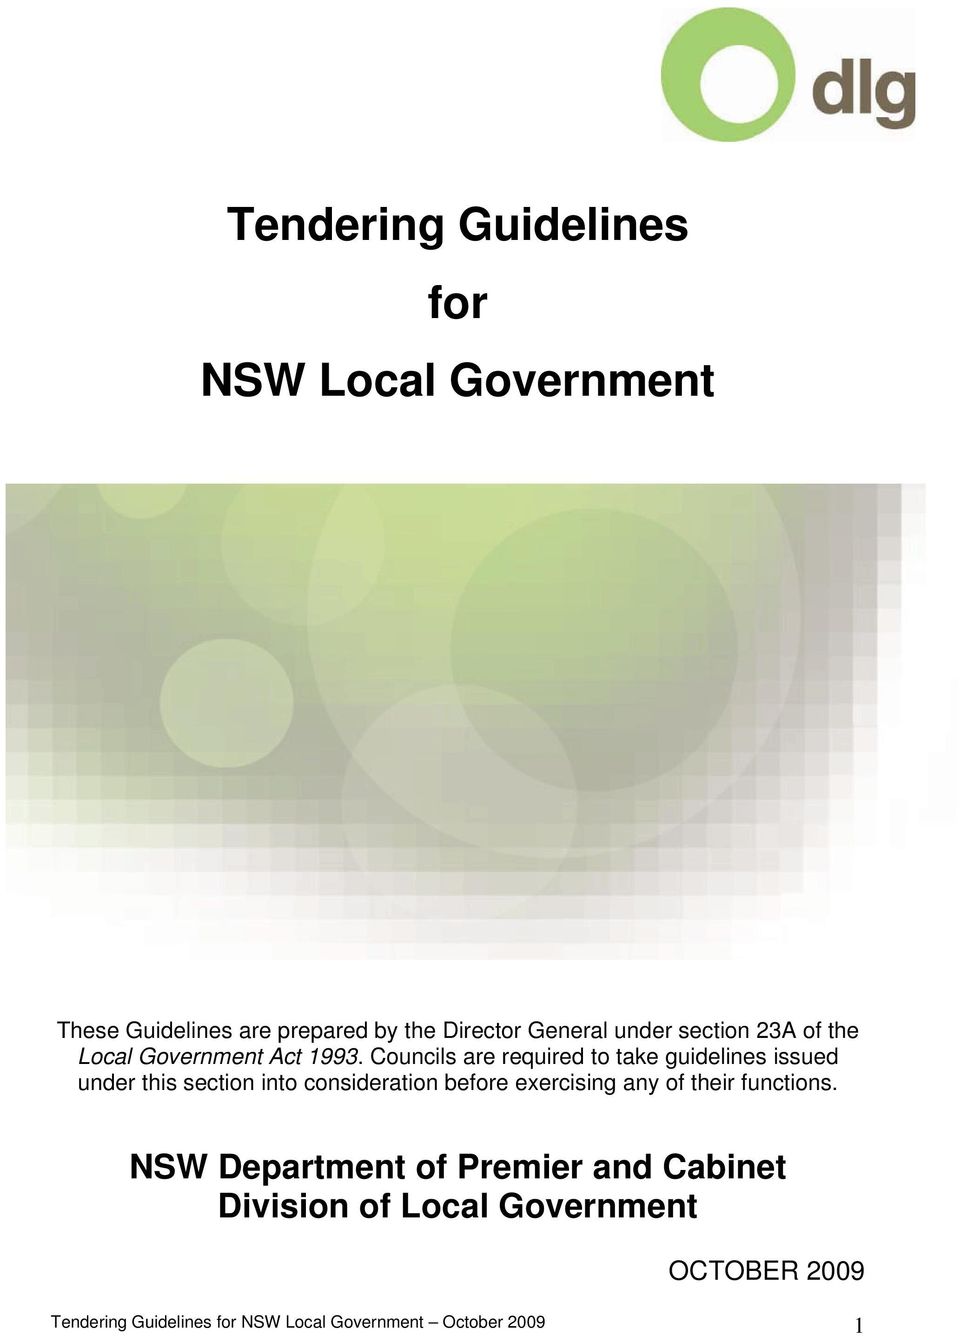 Councils are required to take guidelines issued under this section into consideration before exercising